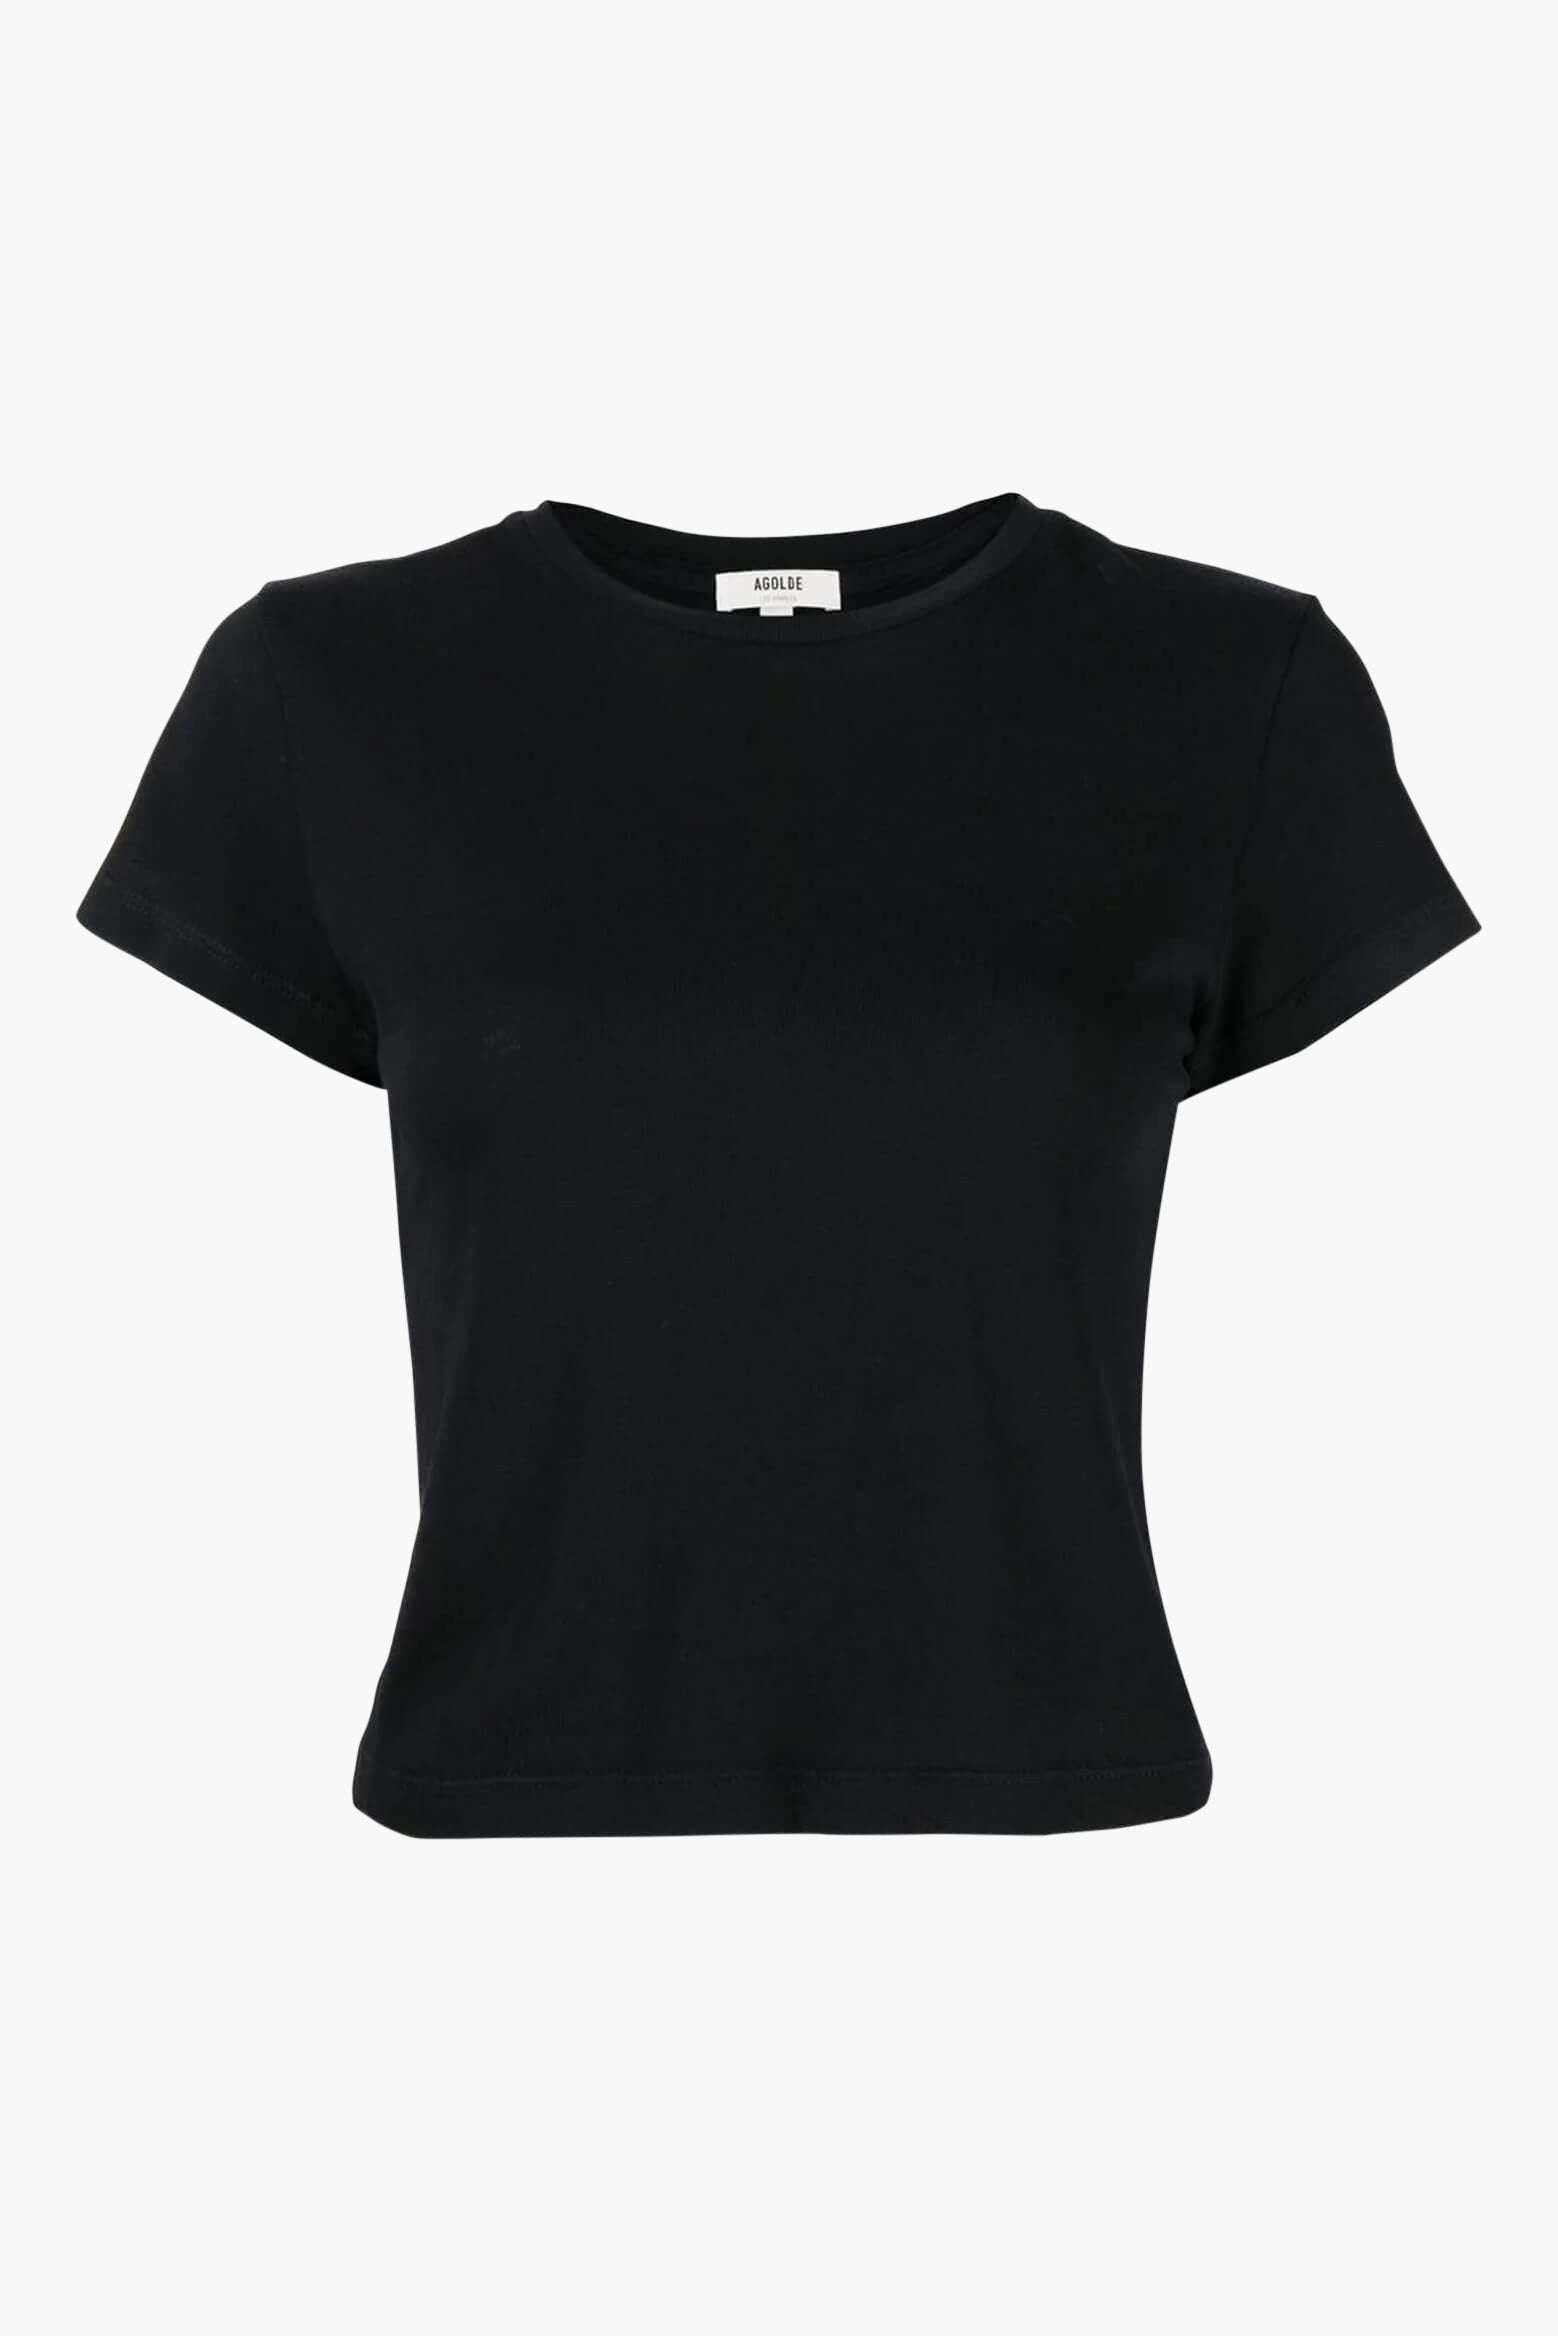 Agolde Adine Shrunken Tee in Nocturne from The New Trend